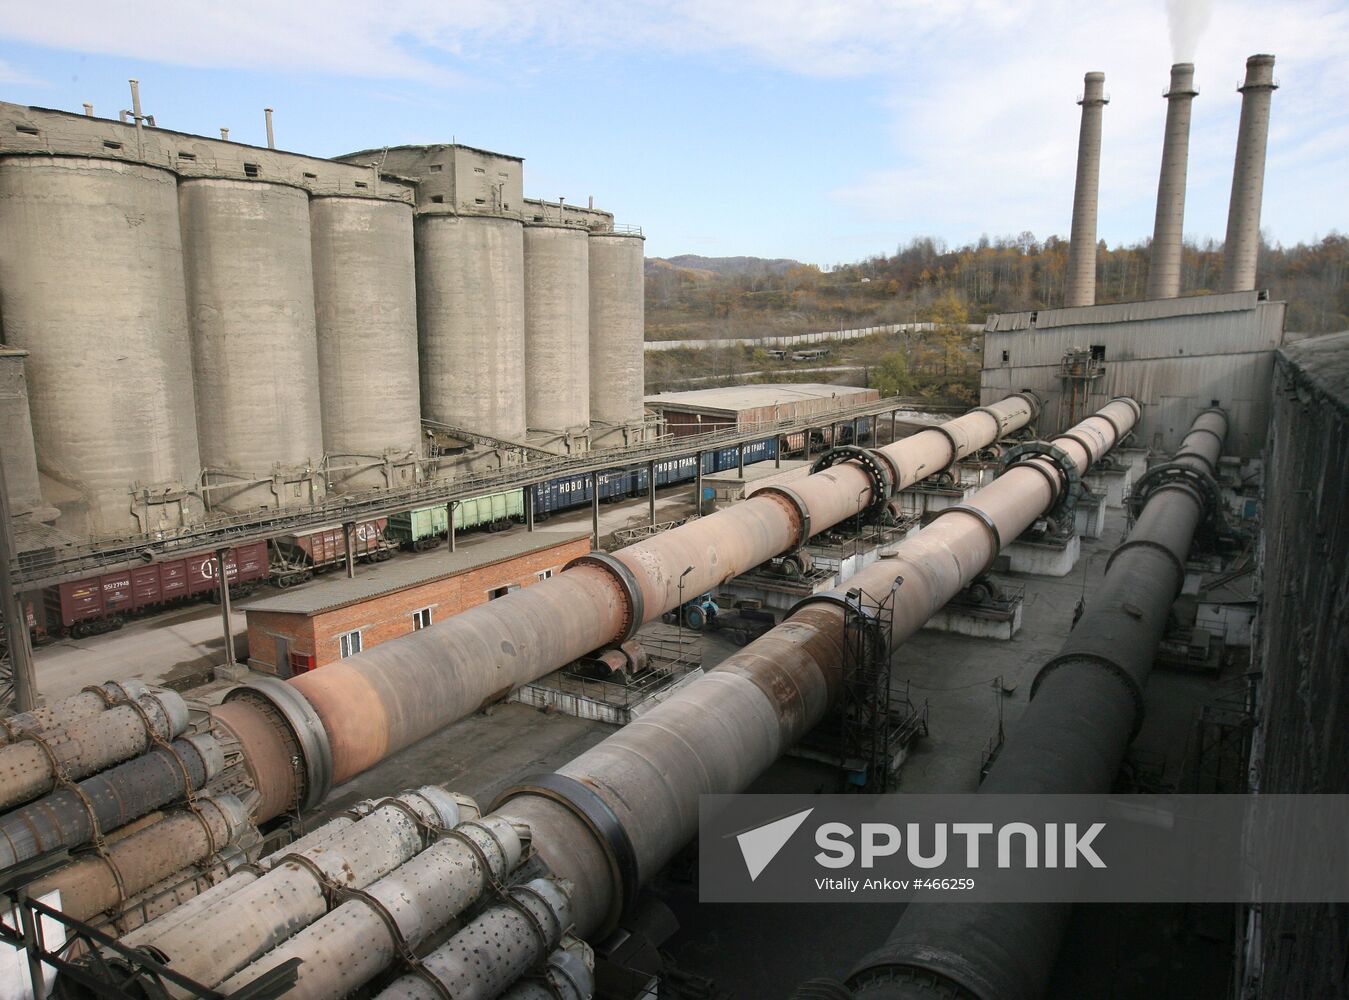 Teploozersky Cement Plant